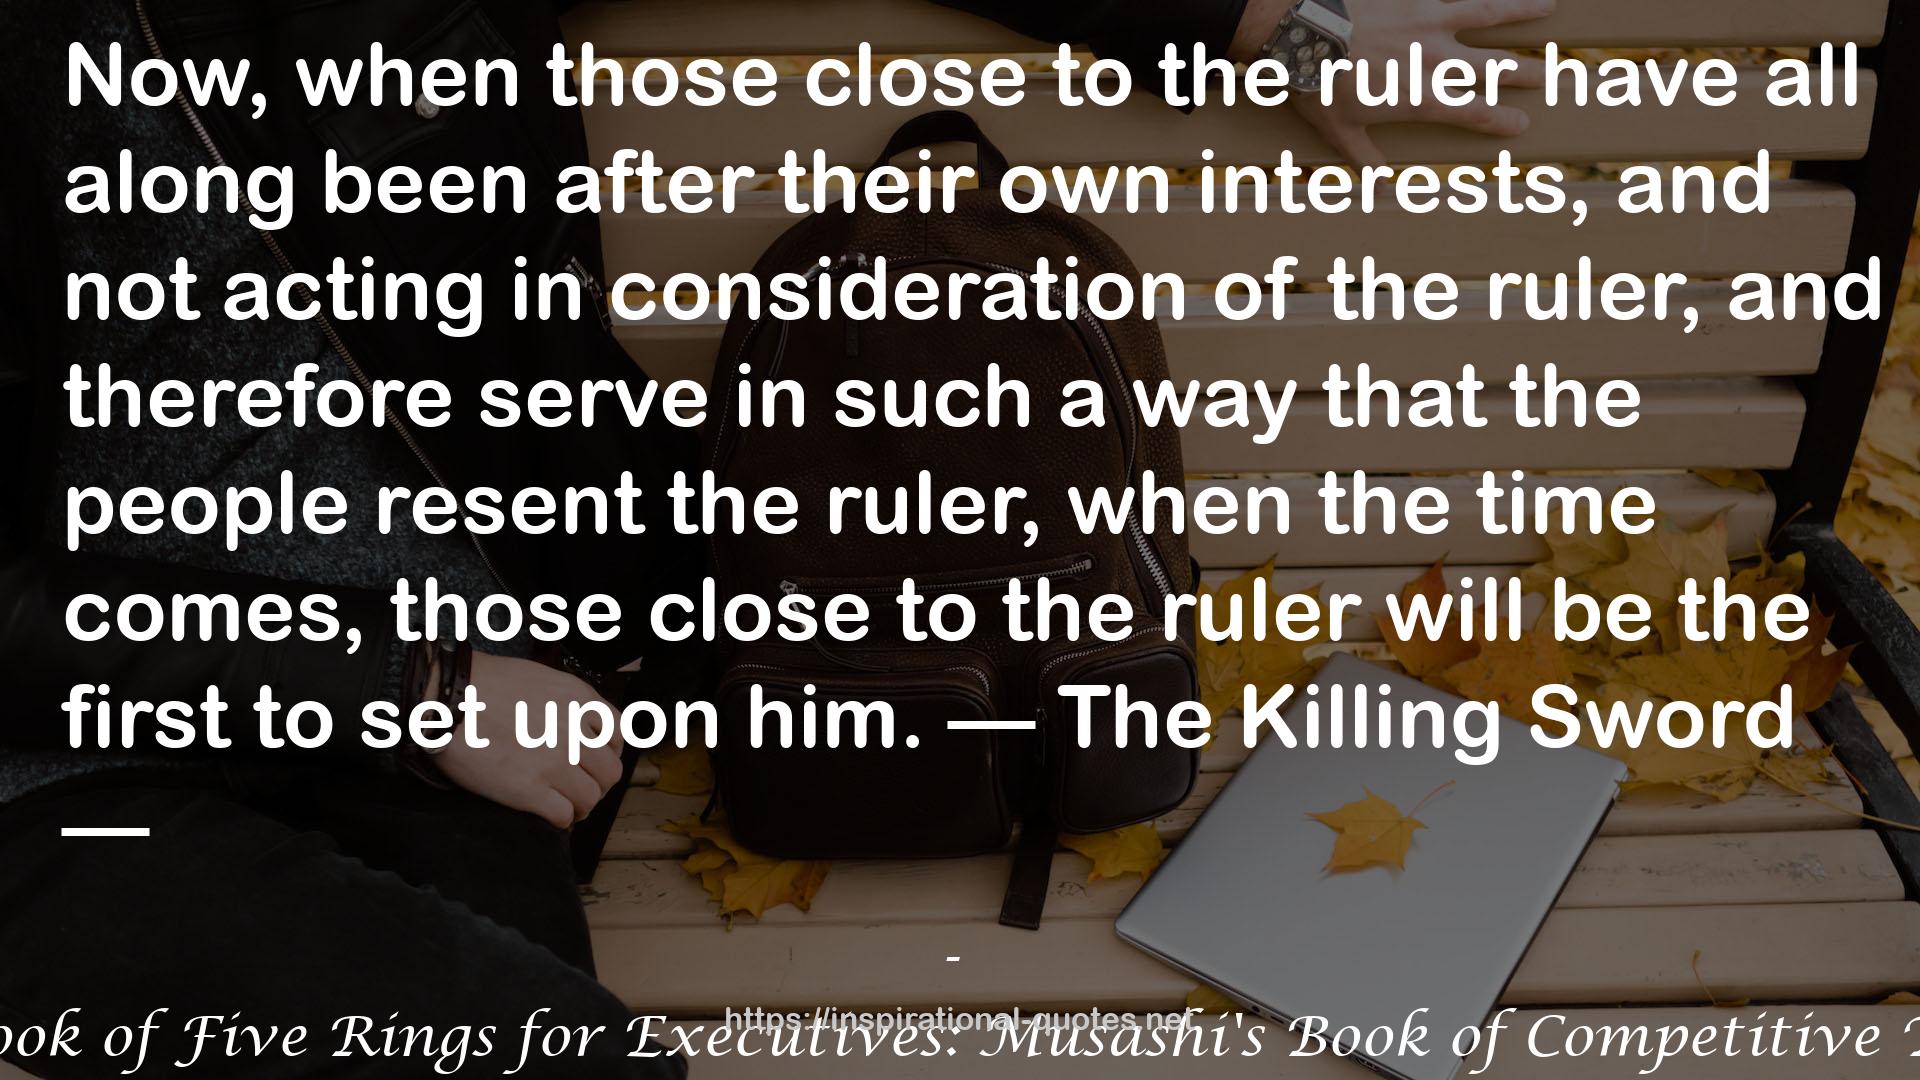 The Book of Five Rings for Executives: Musashi's Book of Competitive Tactics QUOTES